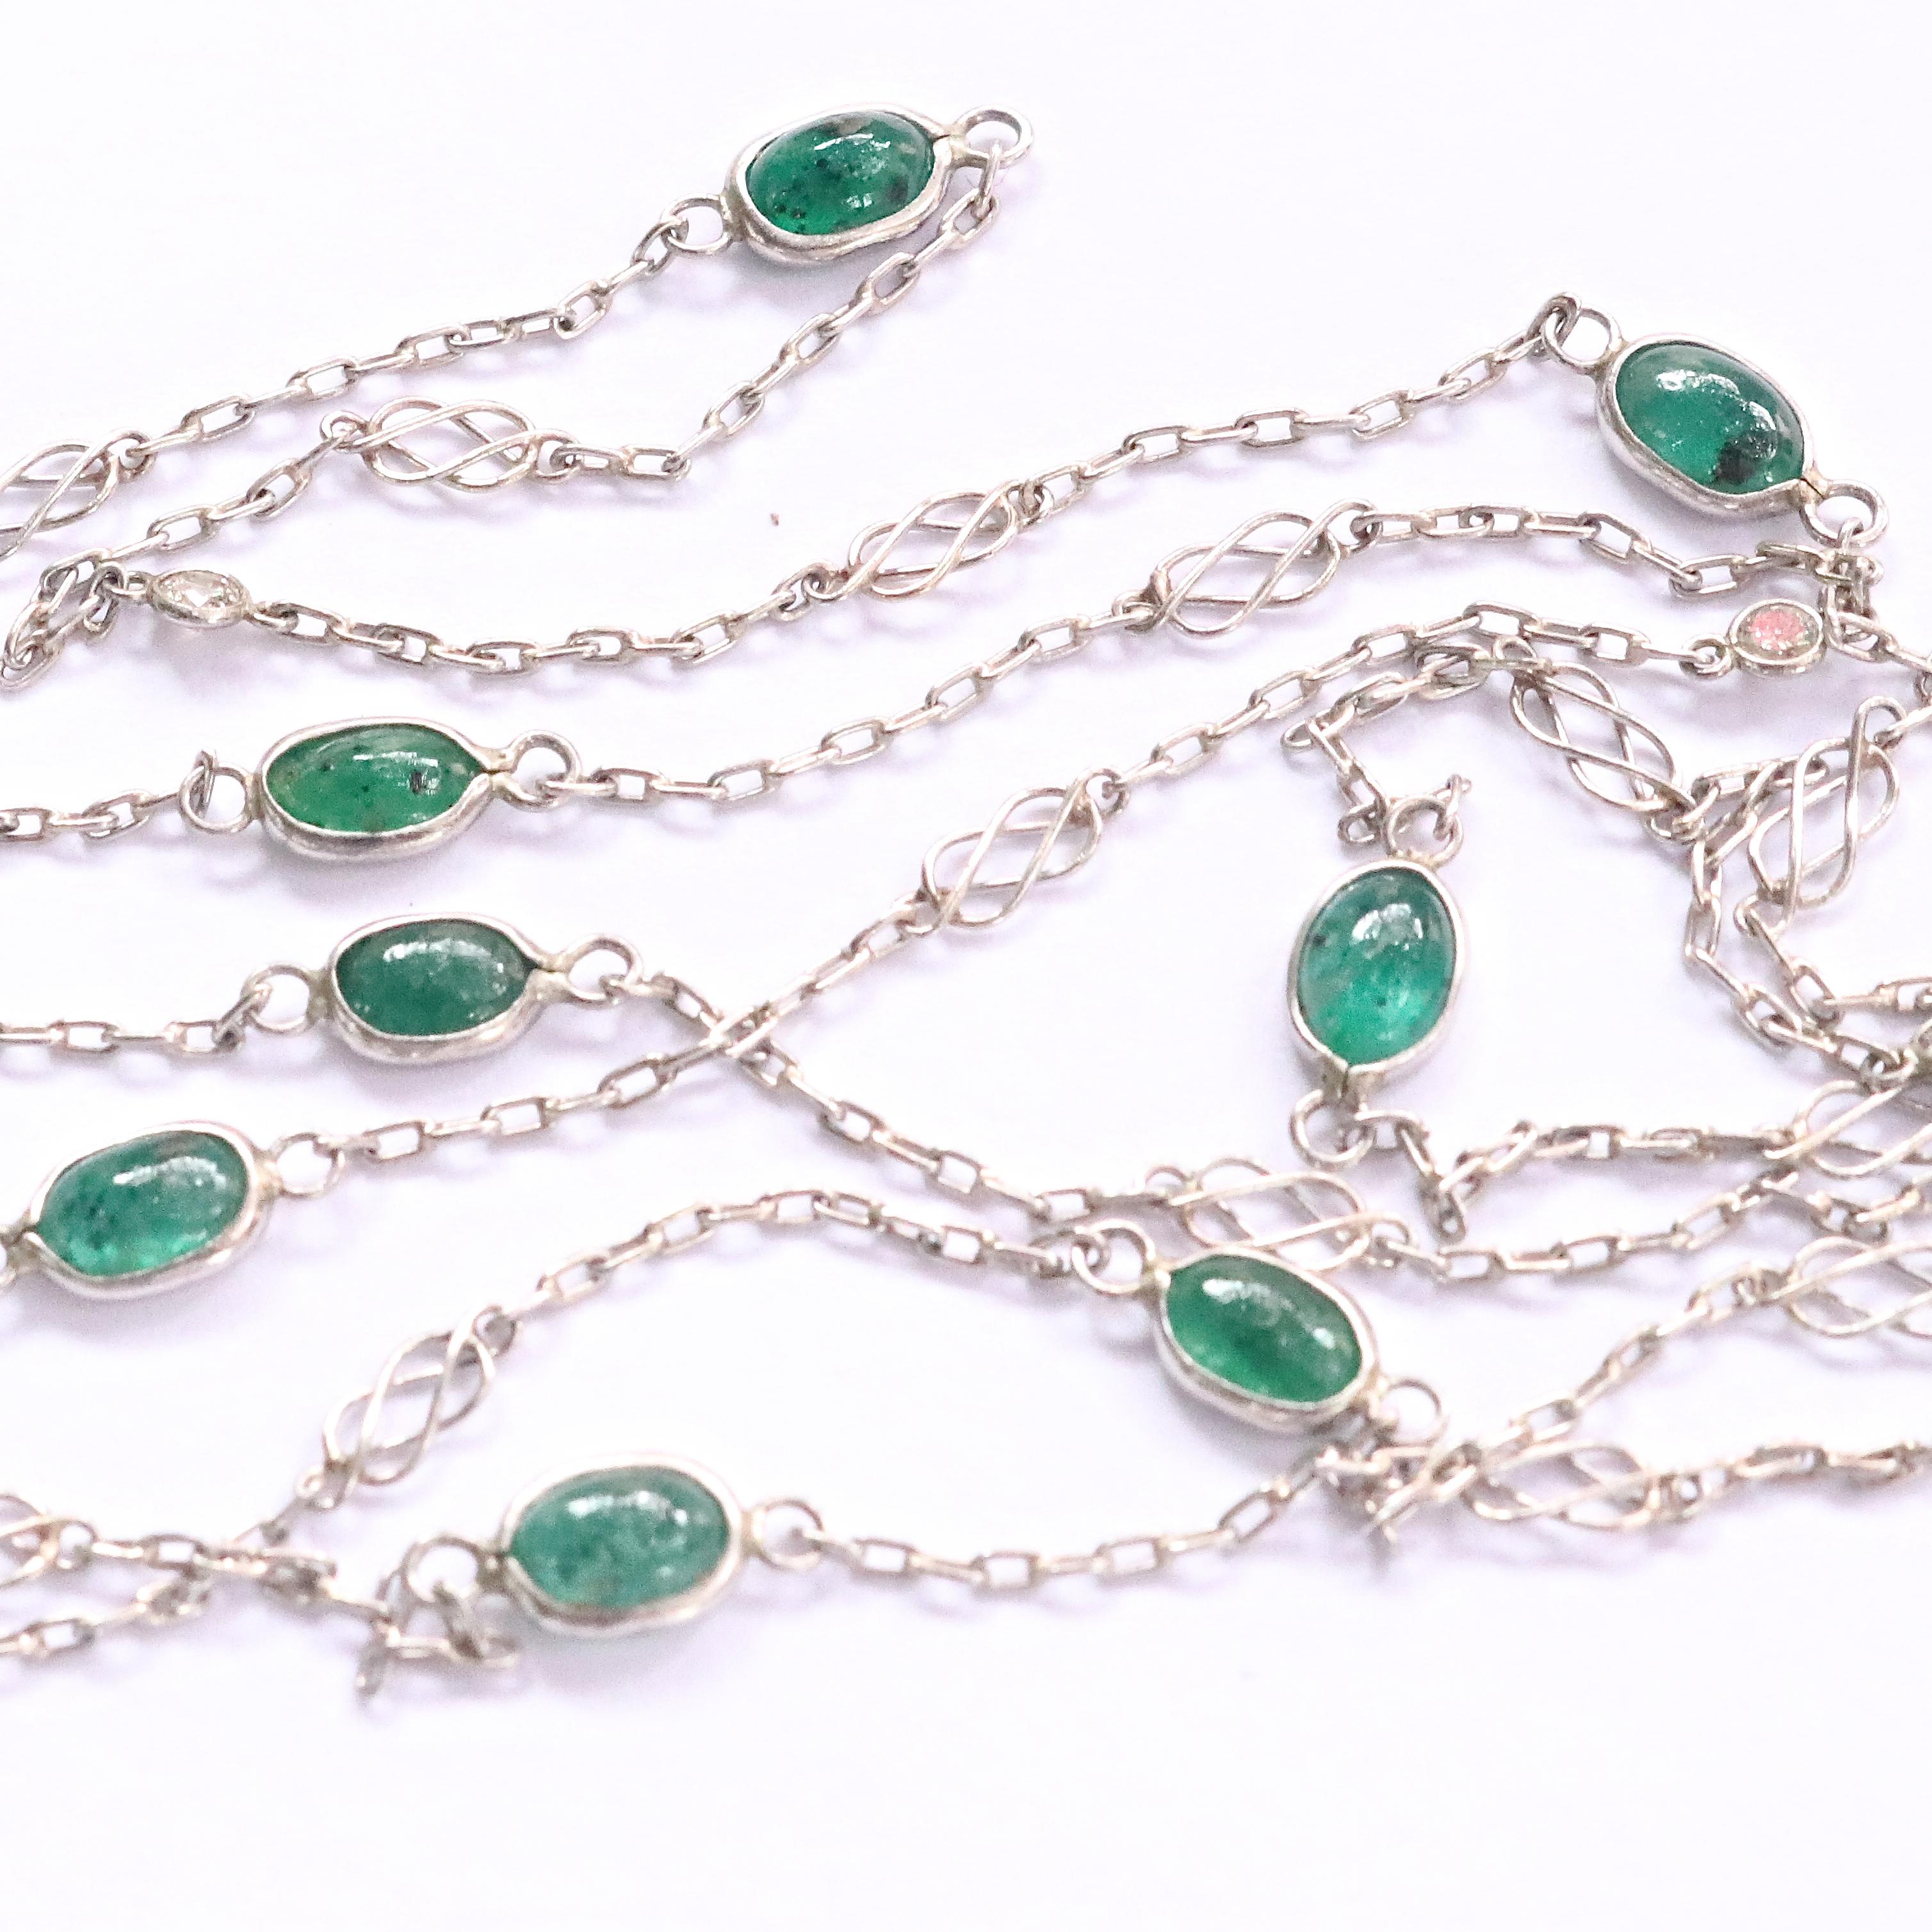 Art deco inspired emerald & diamond platinum necklace. Featuring 10 oval emerald beads that weigh approximately 6 carats. With 9 round brilliant diamonds weighing approximately 0.45 carats, graded H-I color, SI clarity. Circa 2019. 39 inches long.